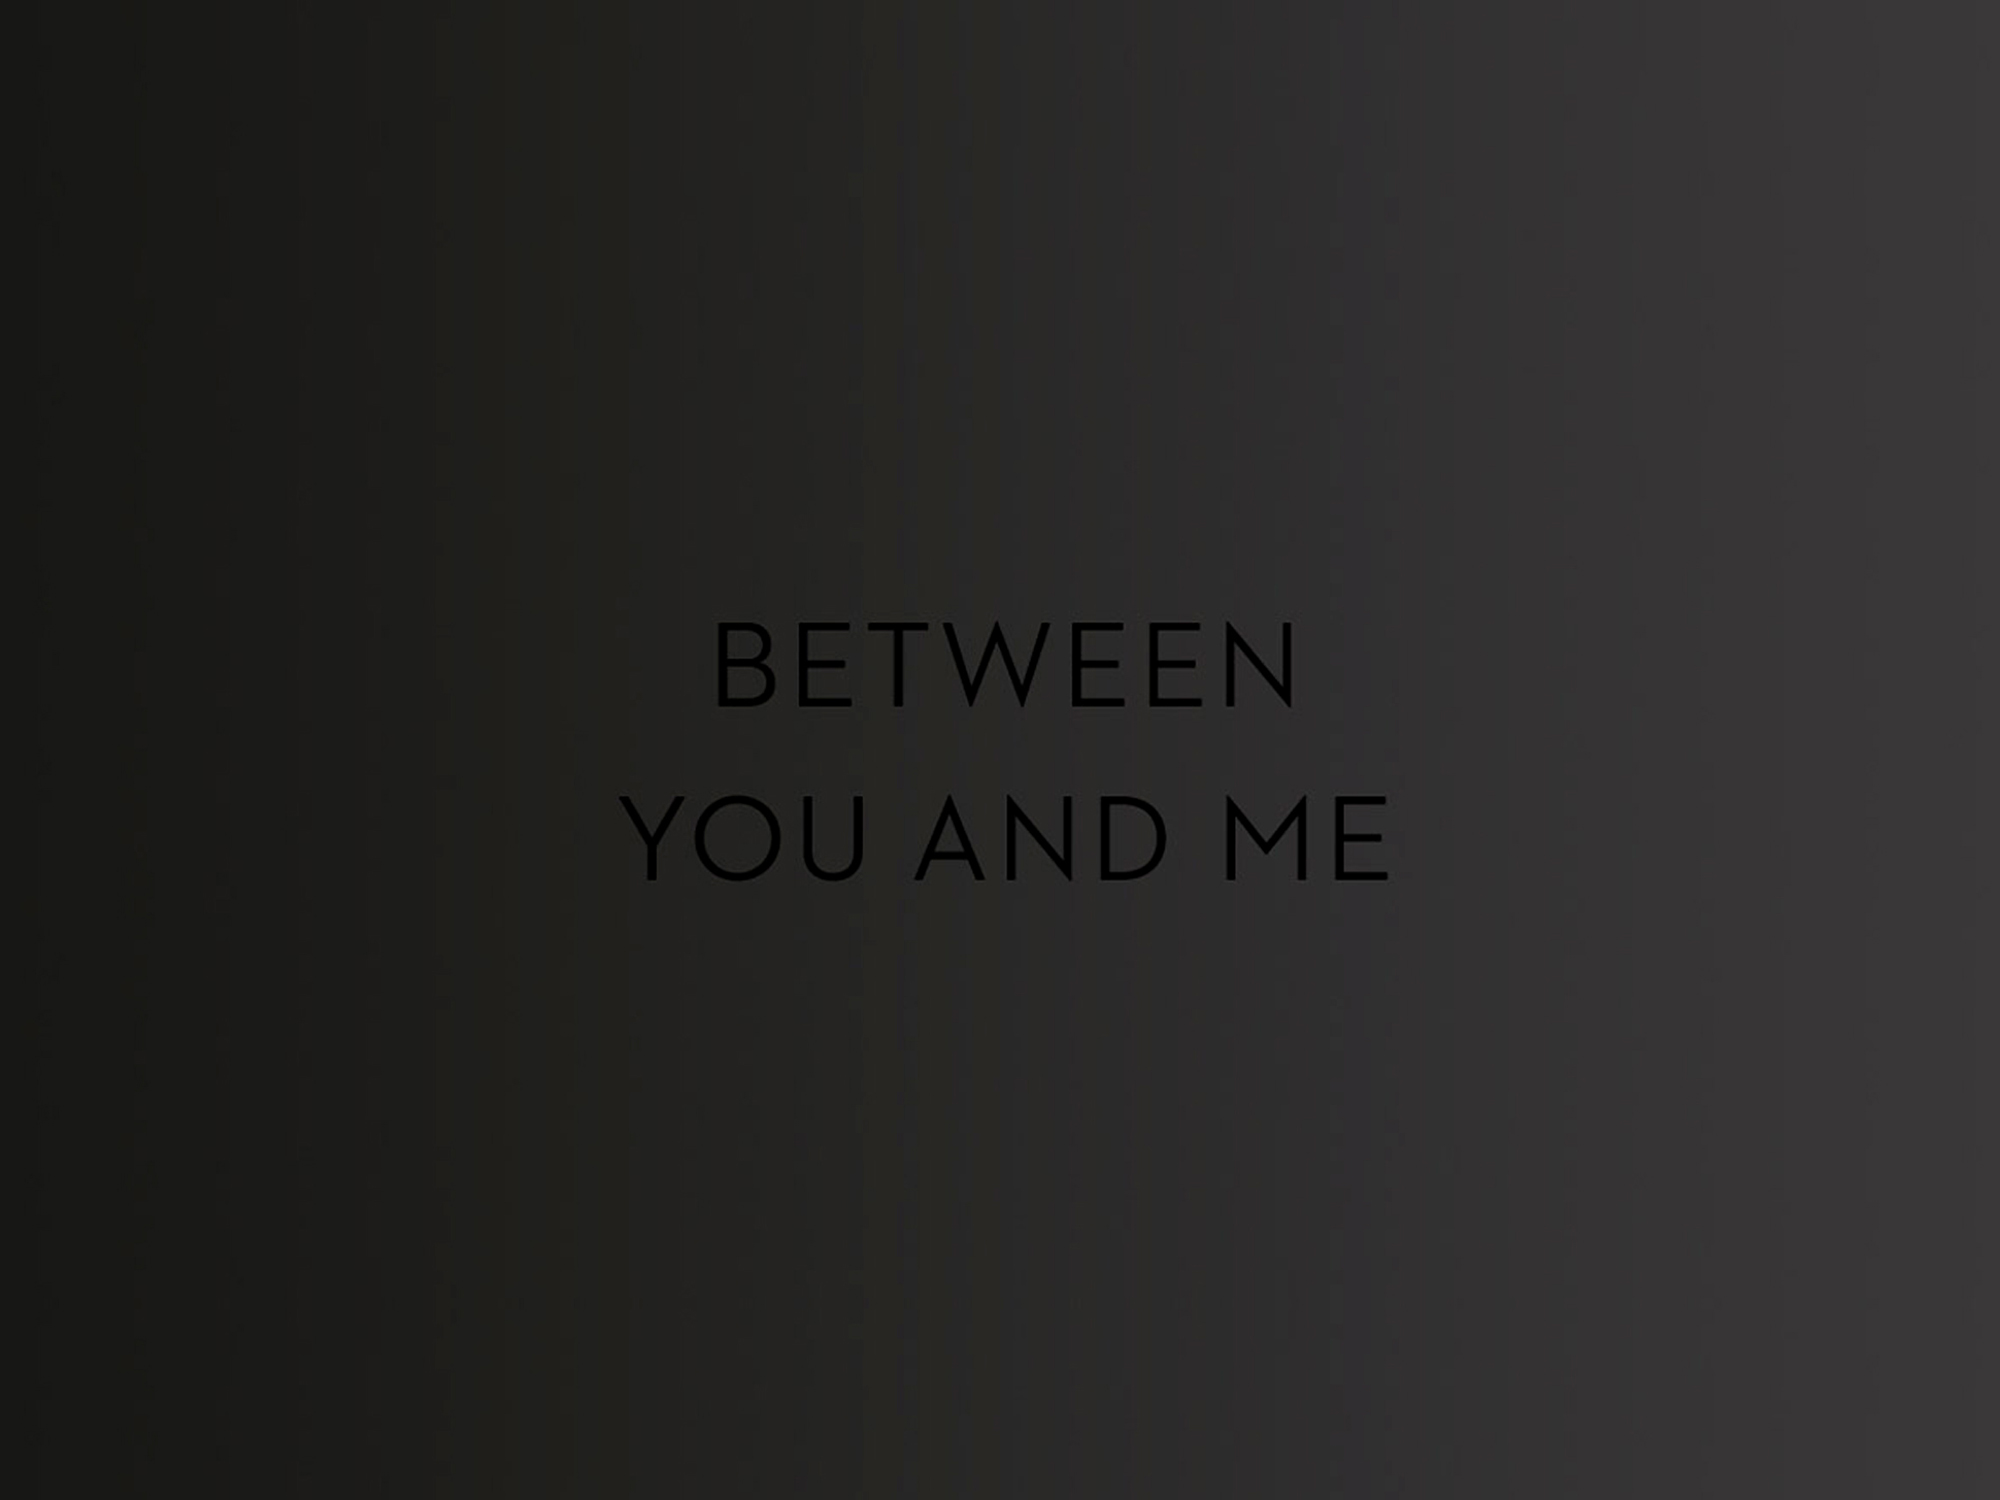 Between you and me – Real Estate (Living)